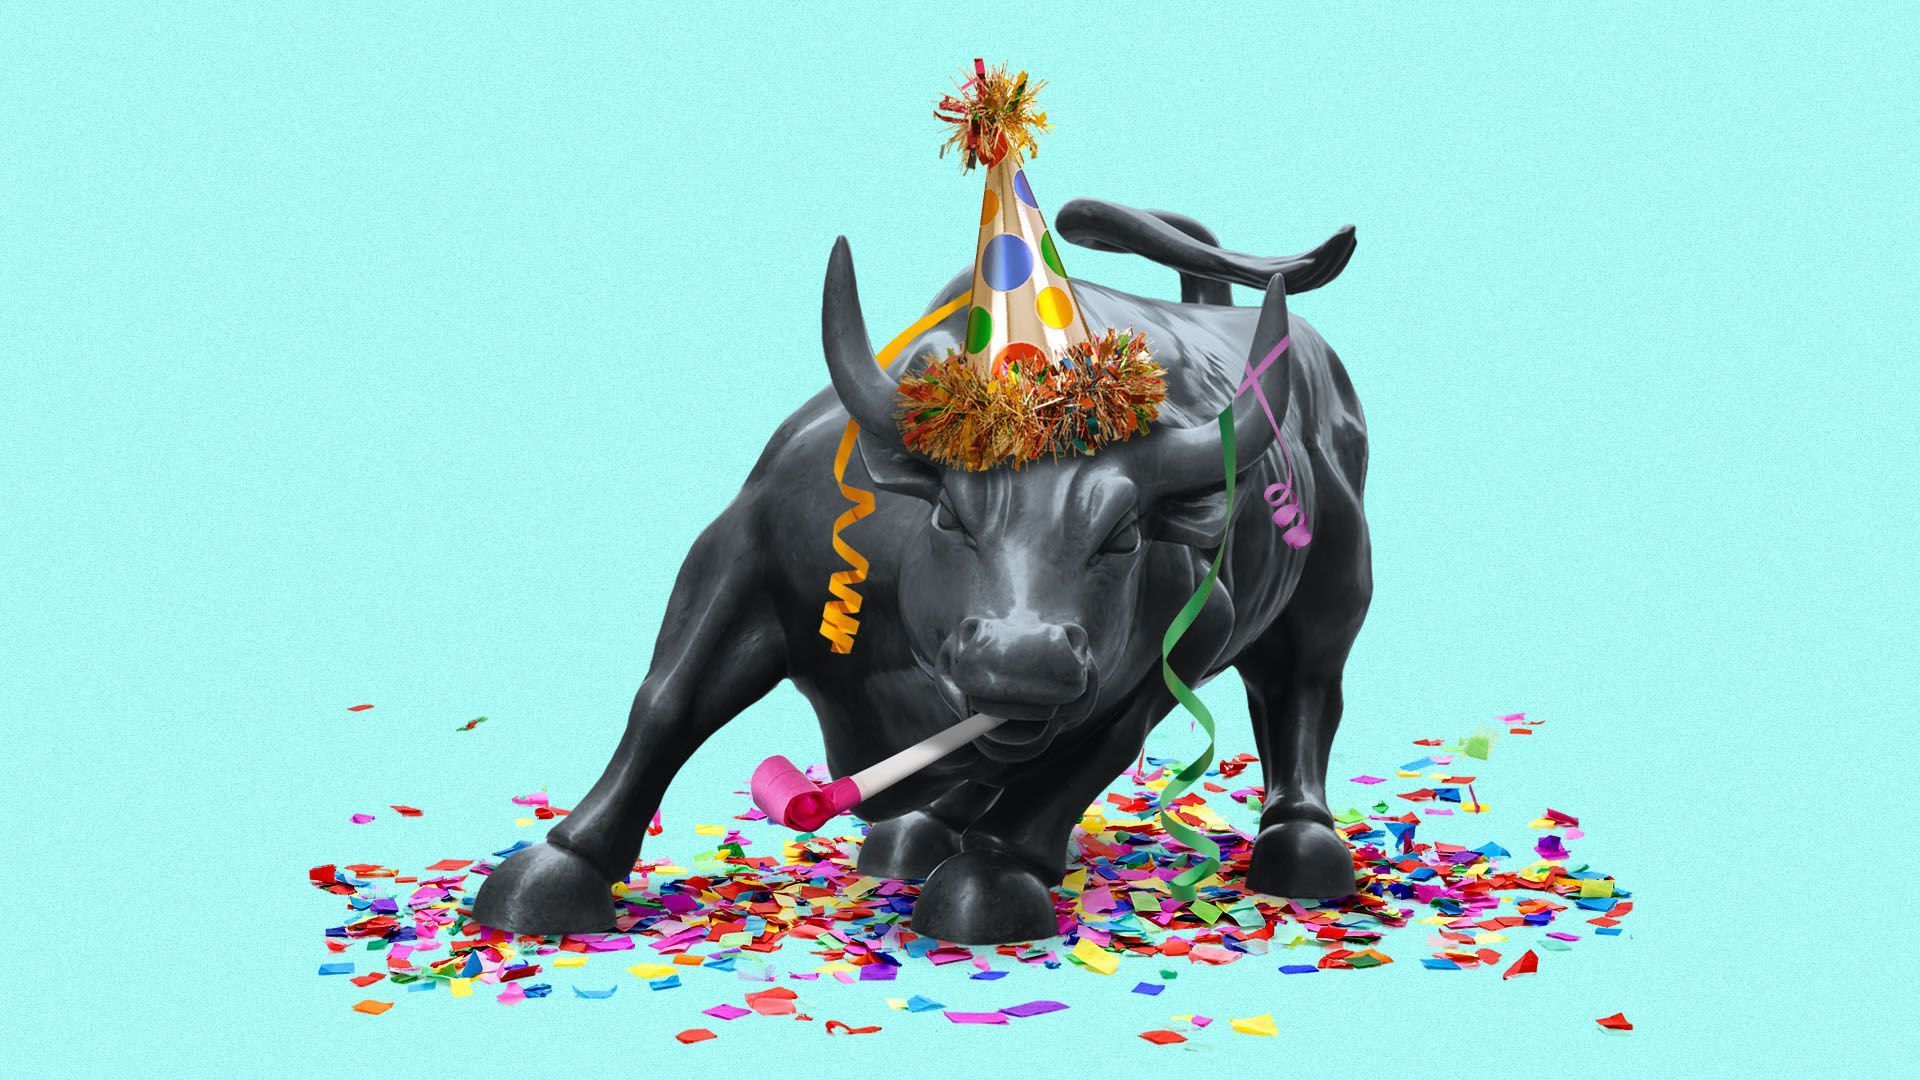 Illustration of bull statue with confetti and party hat.